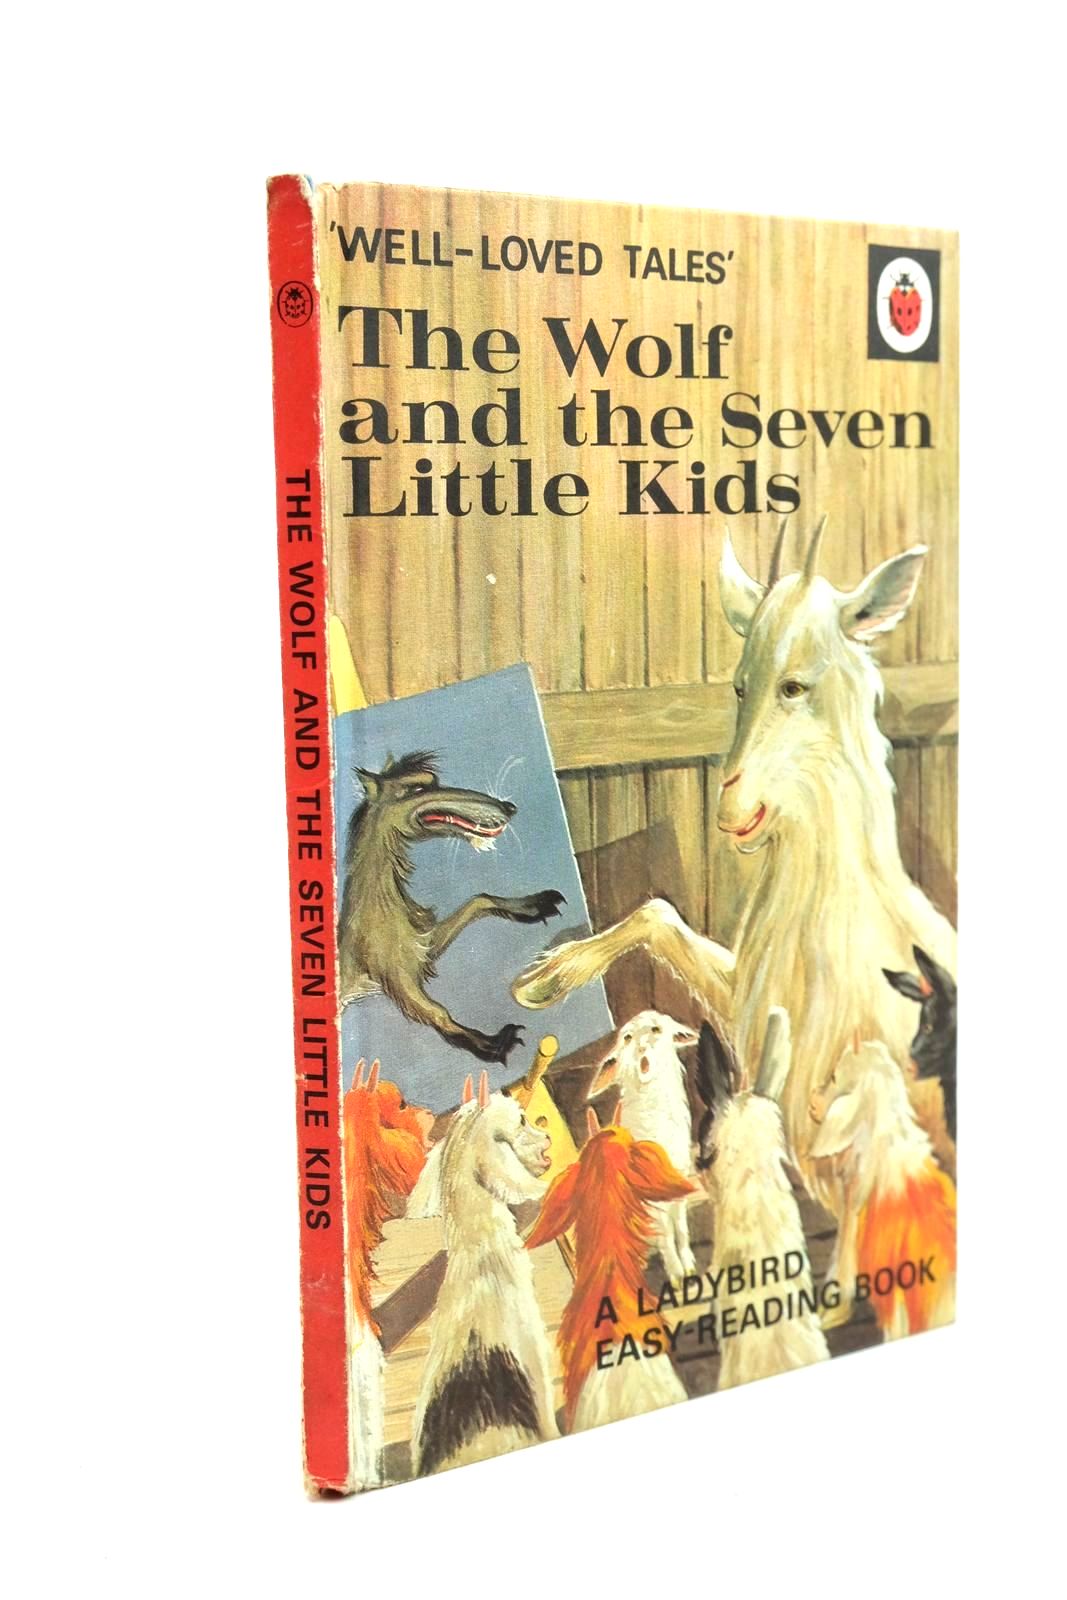 Photo of THE WOLF AND THE SEVEN LITTLE KIDS written by Southgate, Vera illustrated by Lumley, Robert published by Wills &amp; Hepworth Ltd. (STOCK CODE: 1321487)  for sale by Stella & Rose's Books